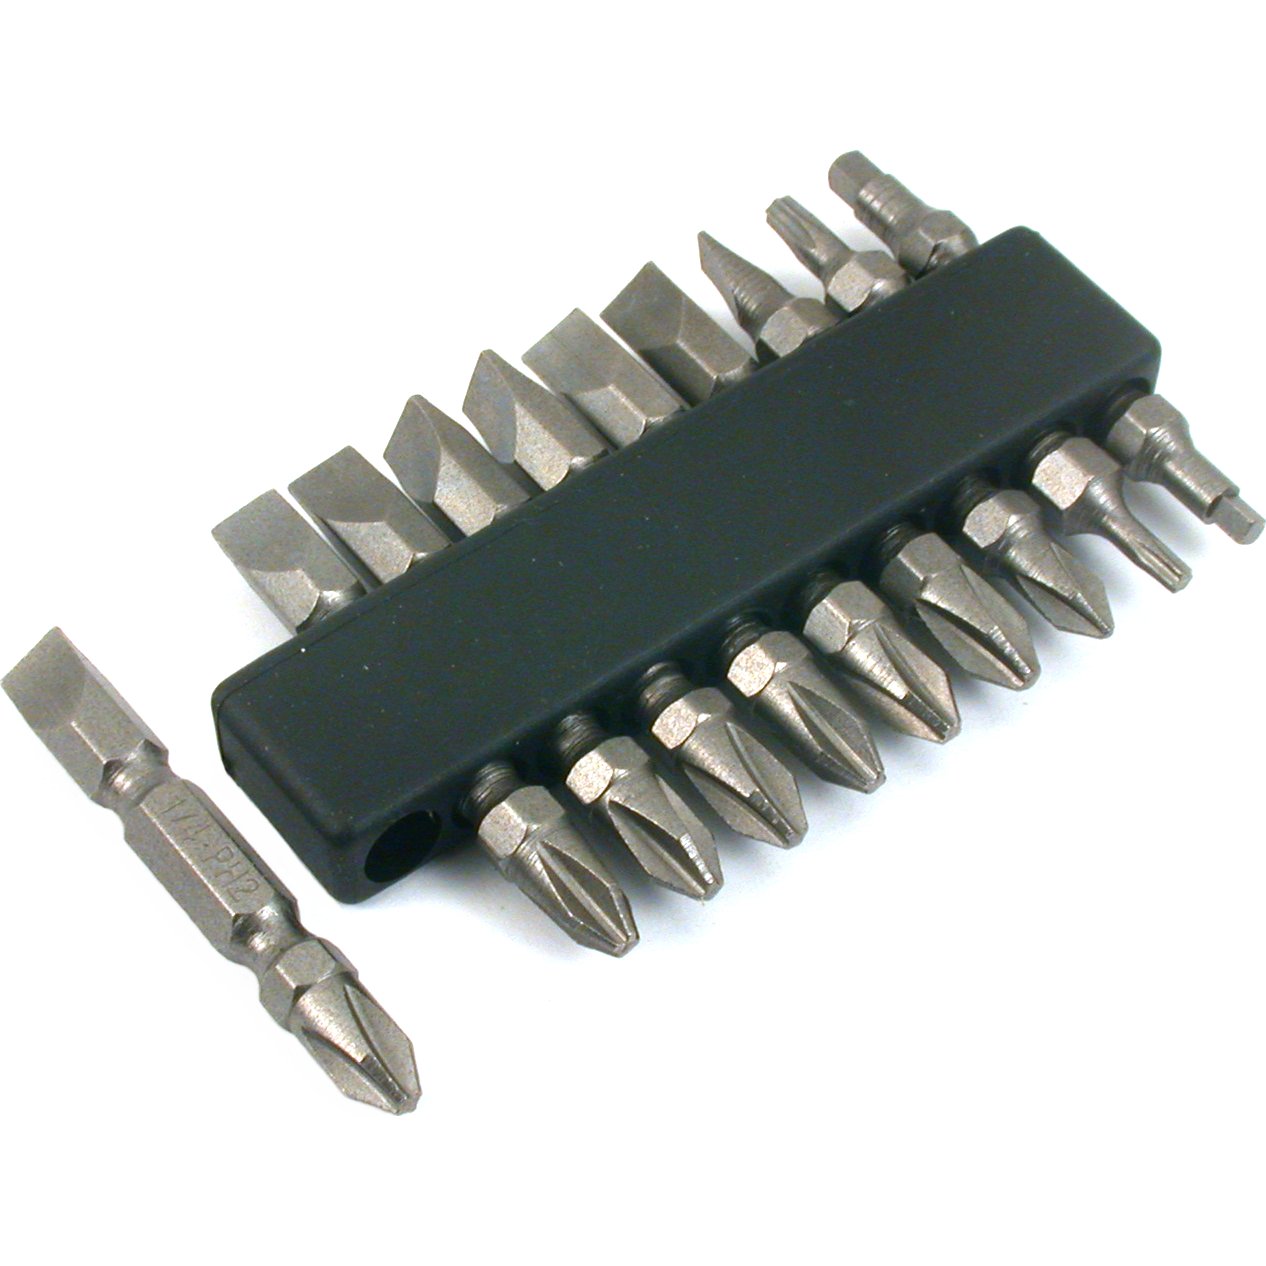 Findingking 10 Double End Phillips & Slotted Screwdriver Bits